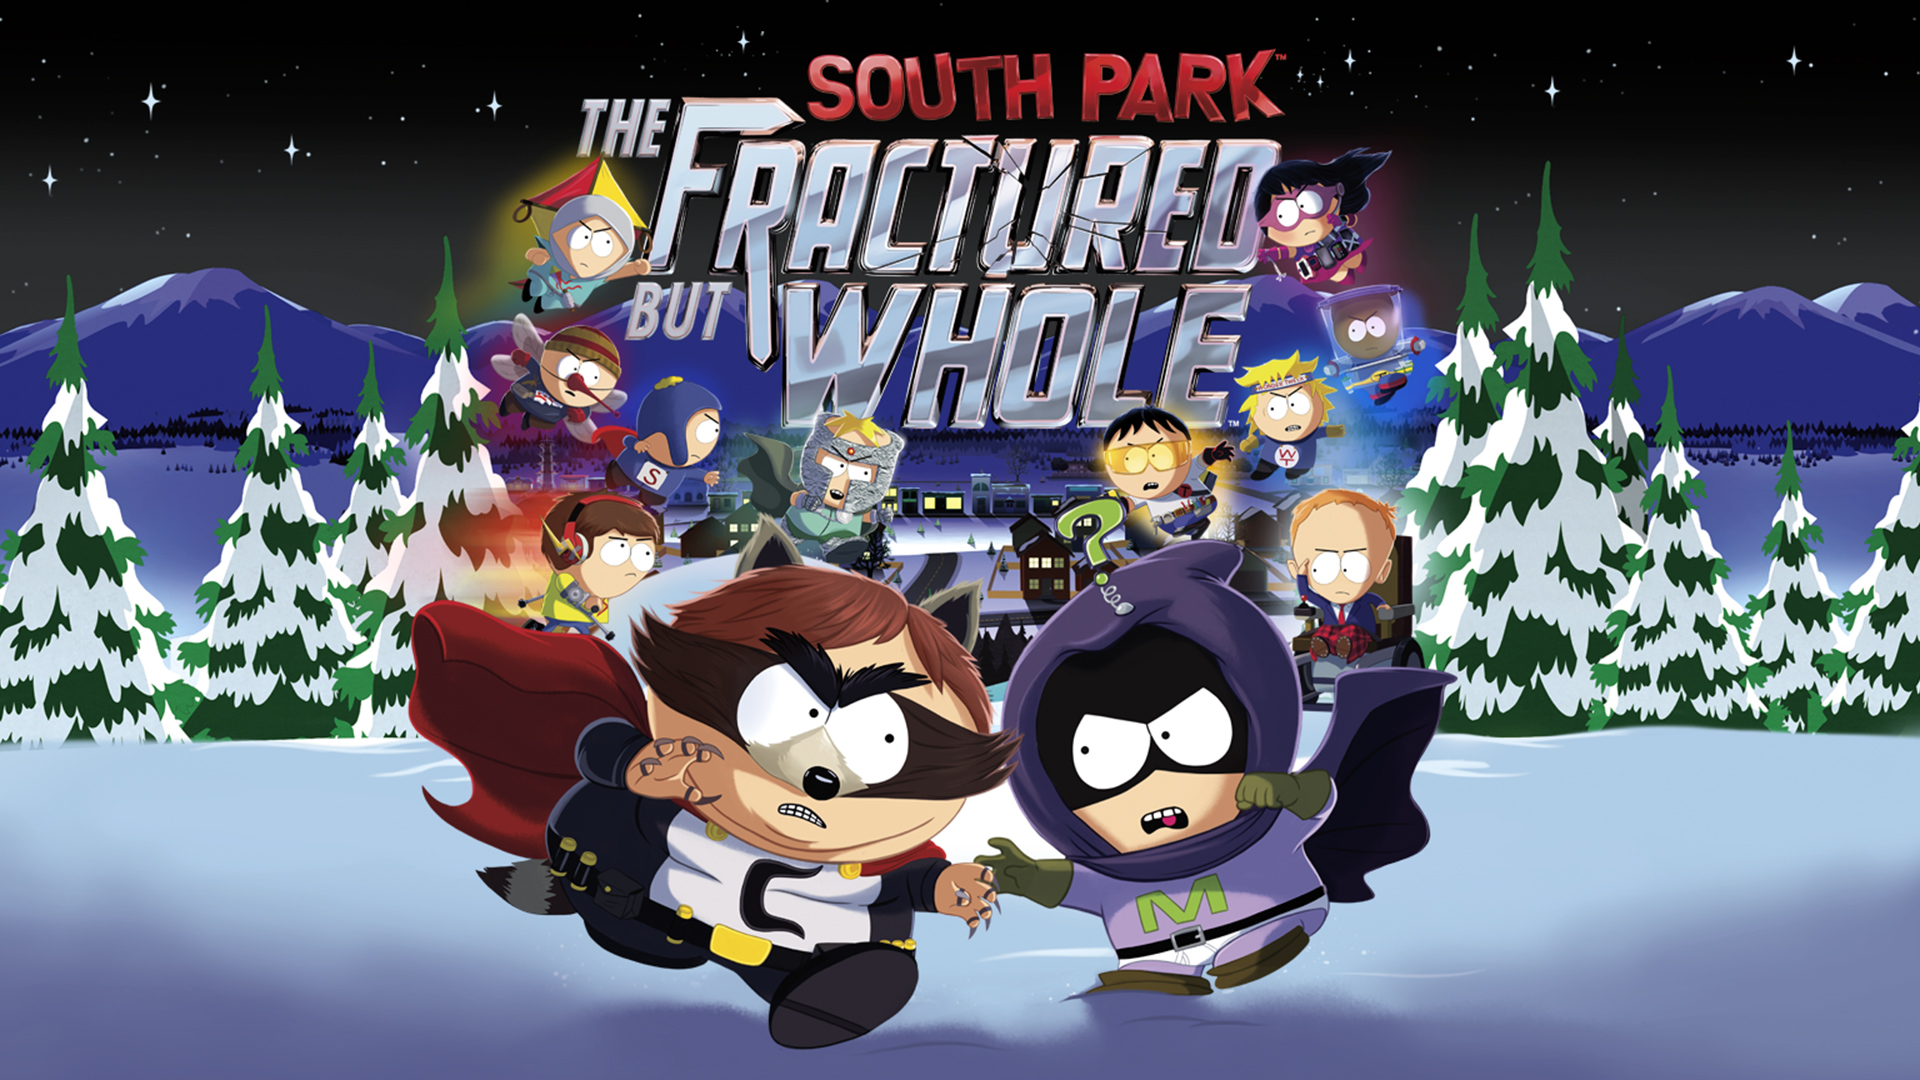 South Park™: The Fractured but Whole™ - Standard Edition for Nintendo Switch - Digital Download $14.99